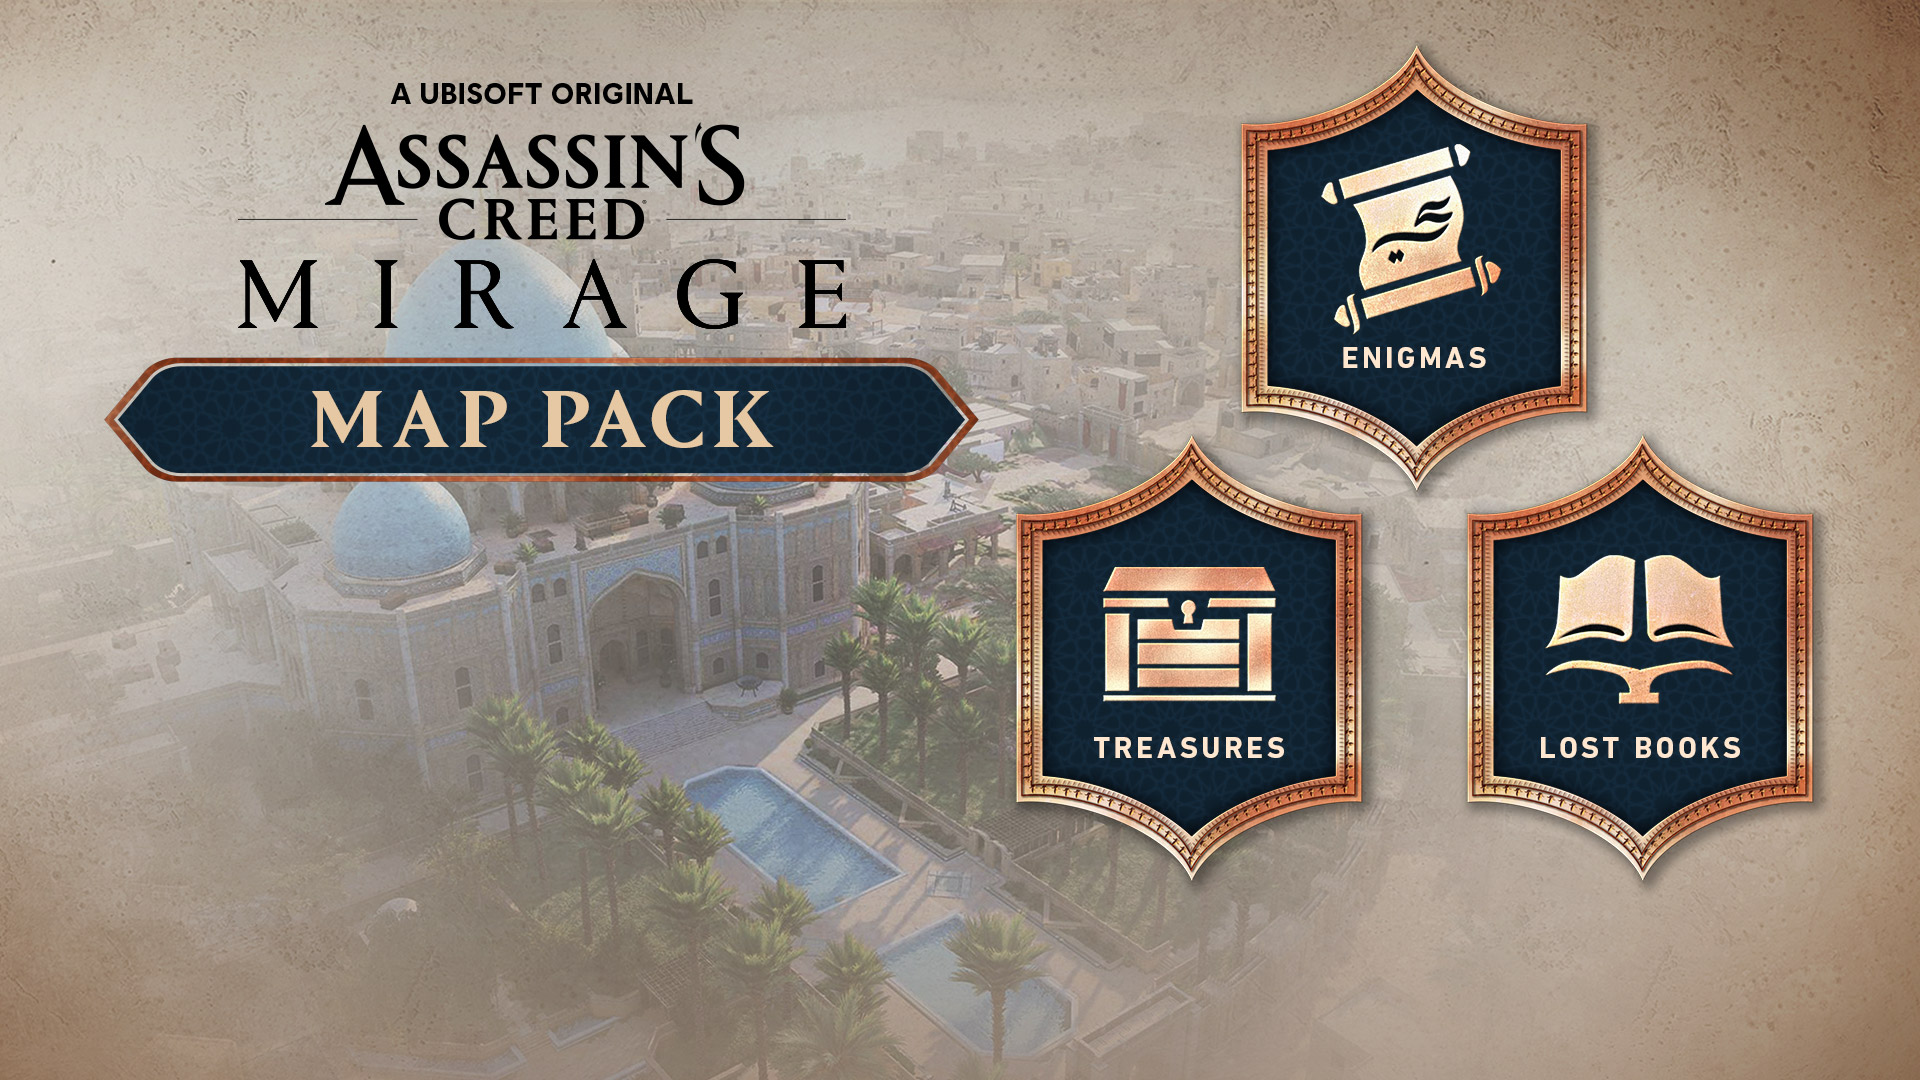 Assassin's Creed Mirage - Map Pack DLC AR XBOX One / Xbox Series X|S CD Key 7.9 usd